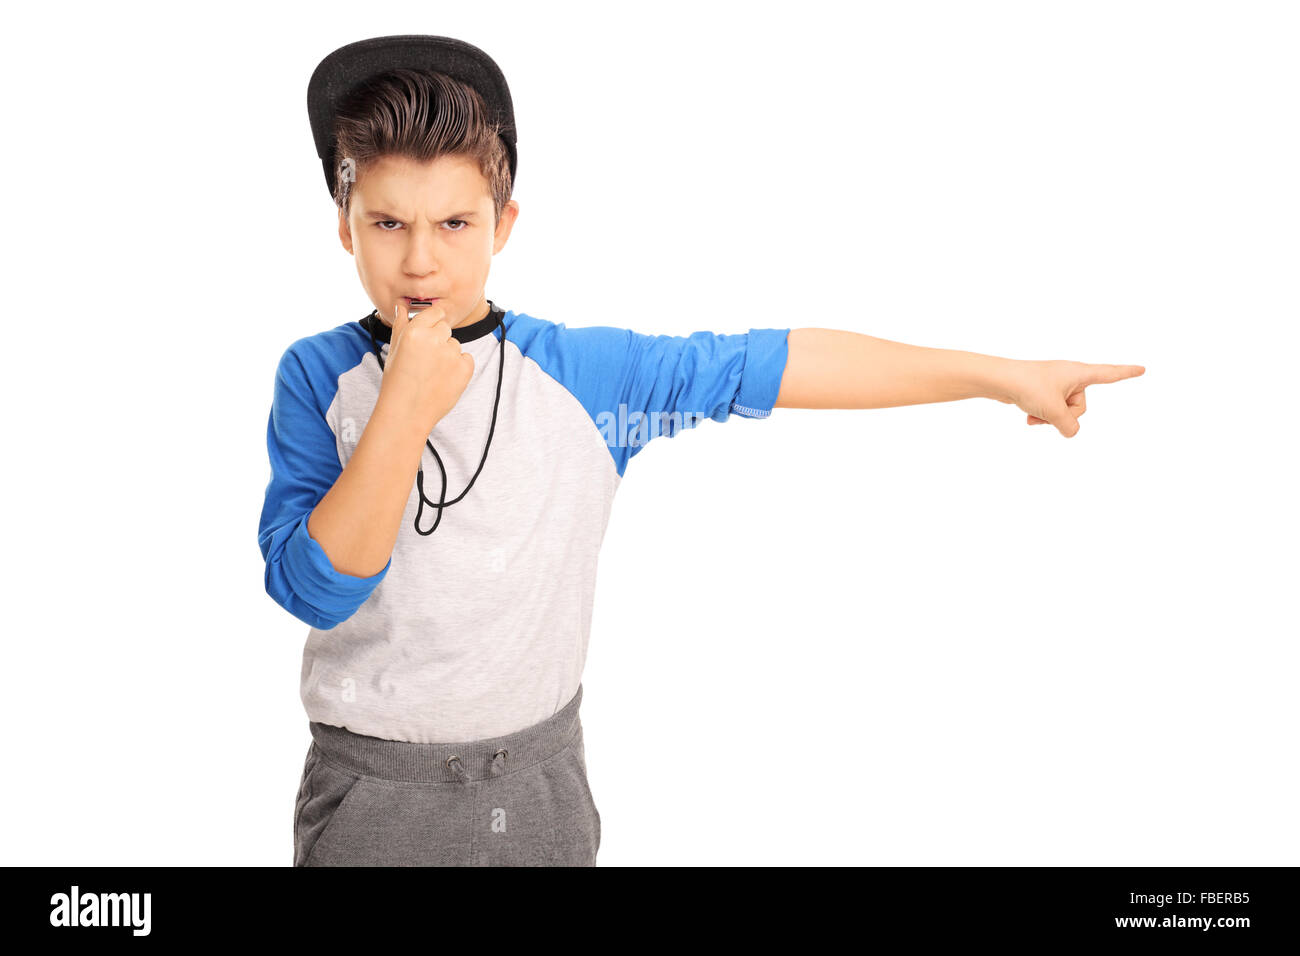 Studio shot of an angry kid in sportswear blowing a whistle and pointing right isolated on white background Stock Photo